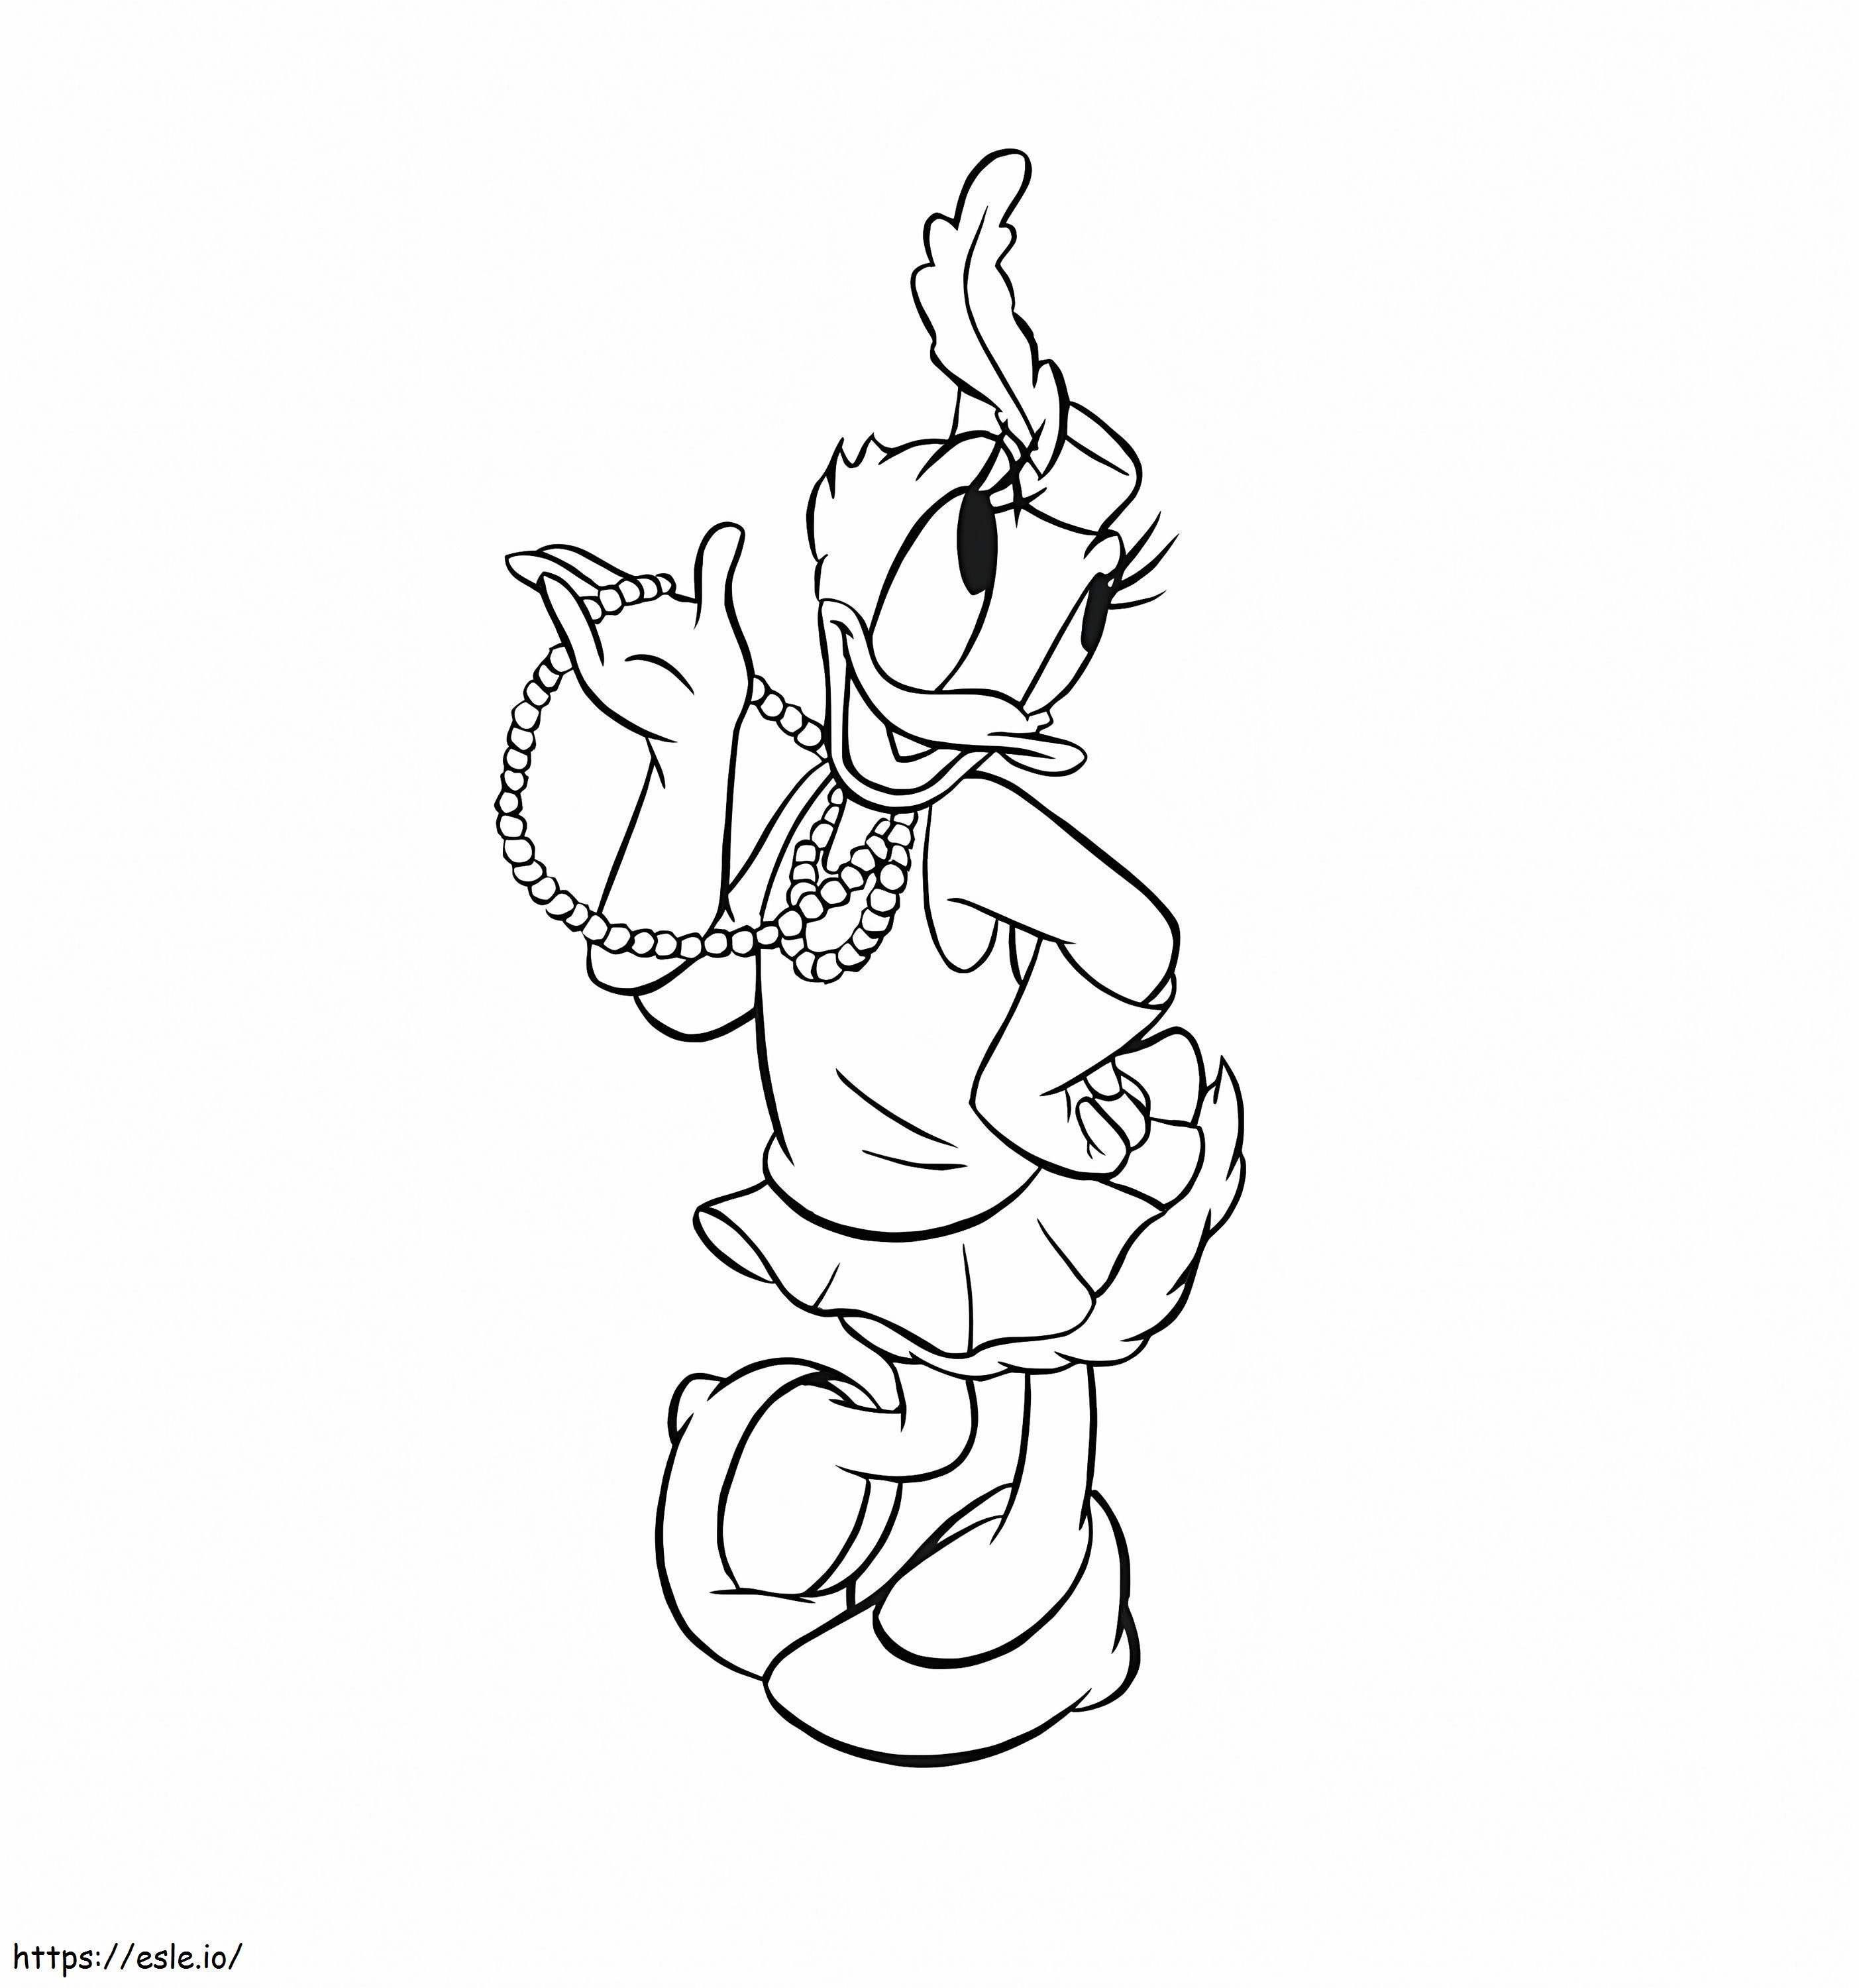 Daisy Duck Holding A Pearl Necklace coloring page